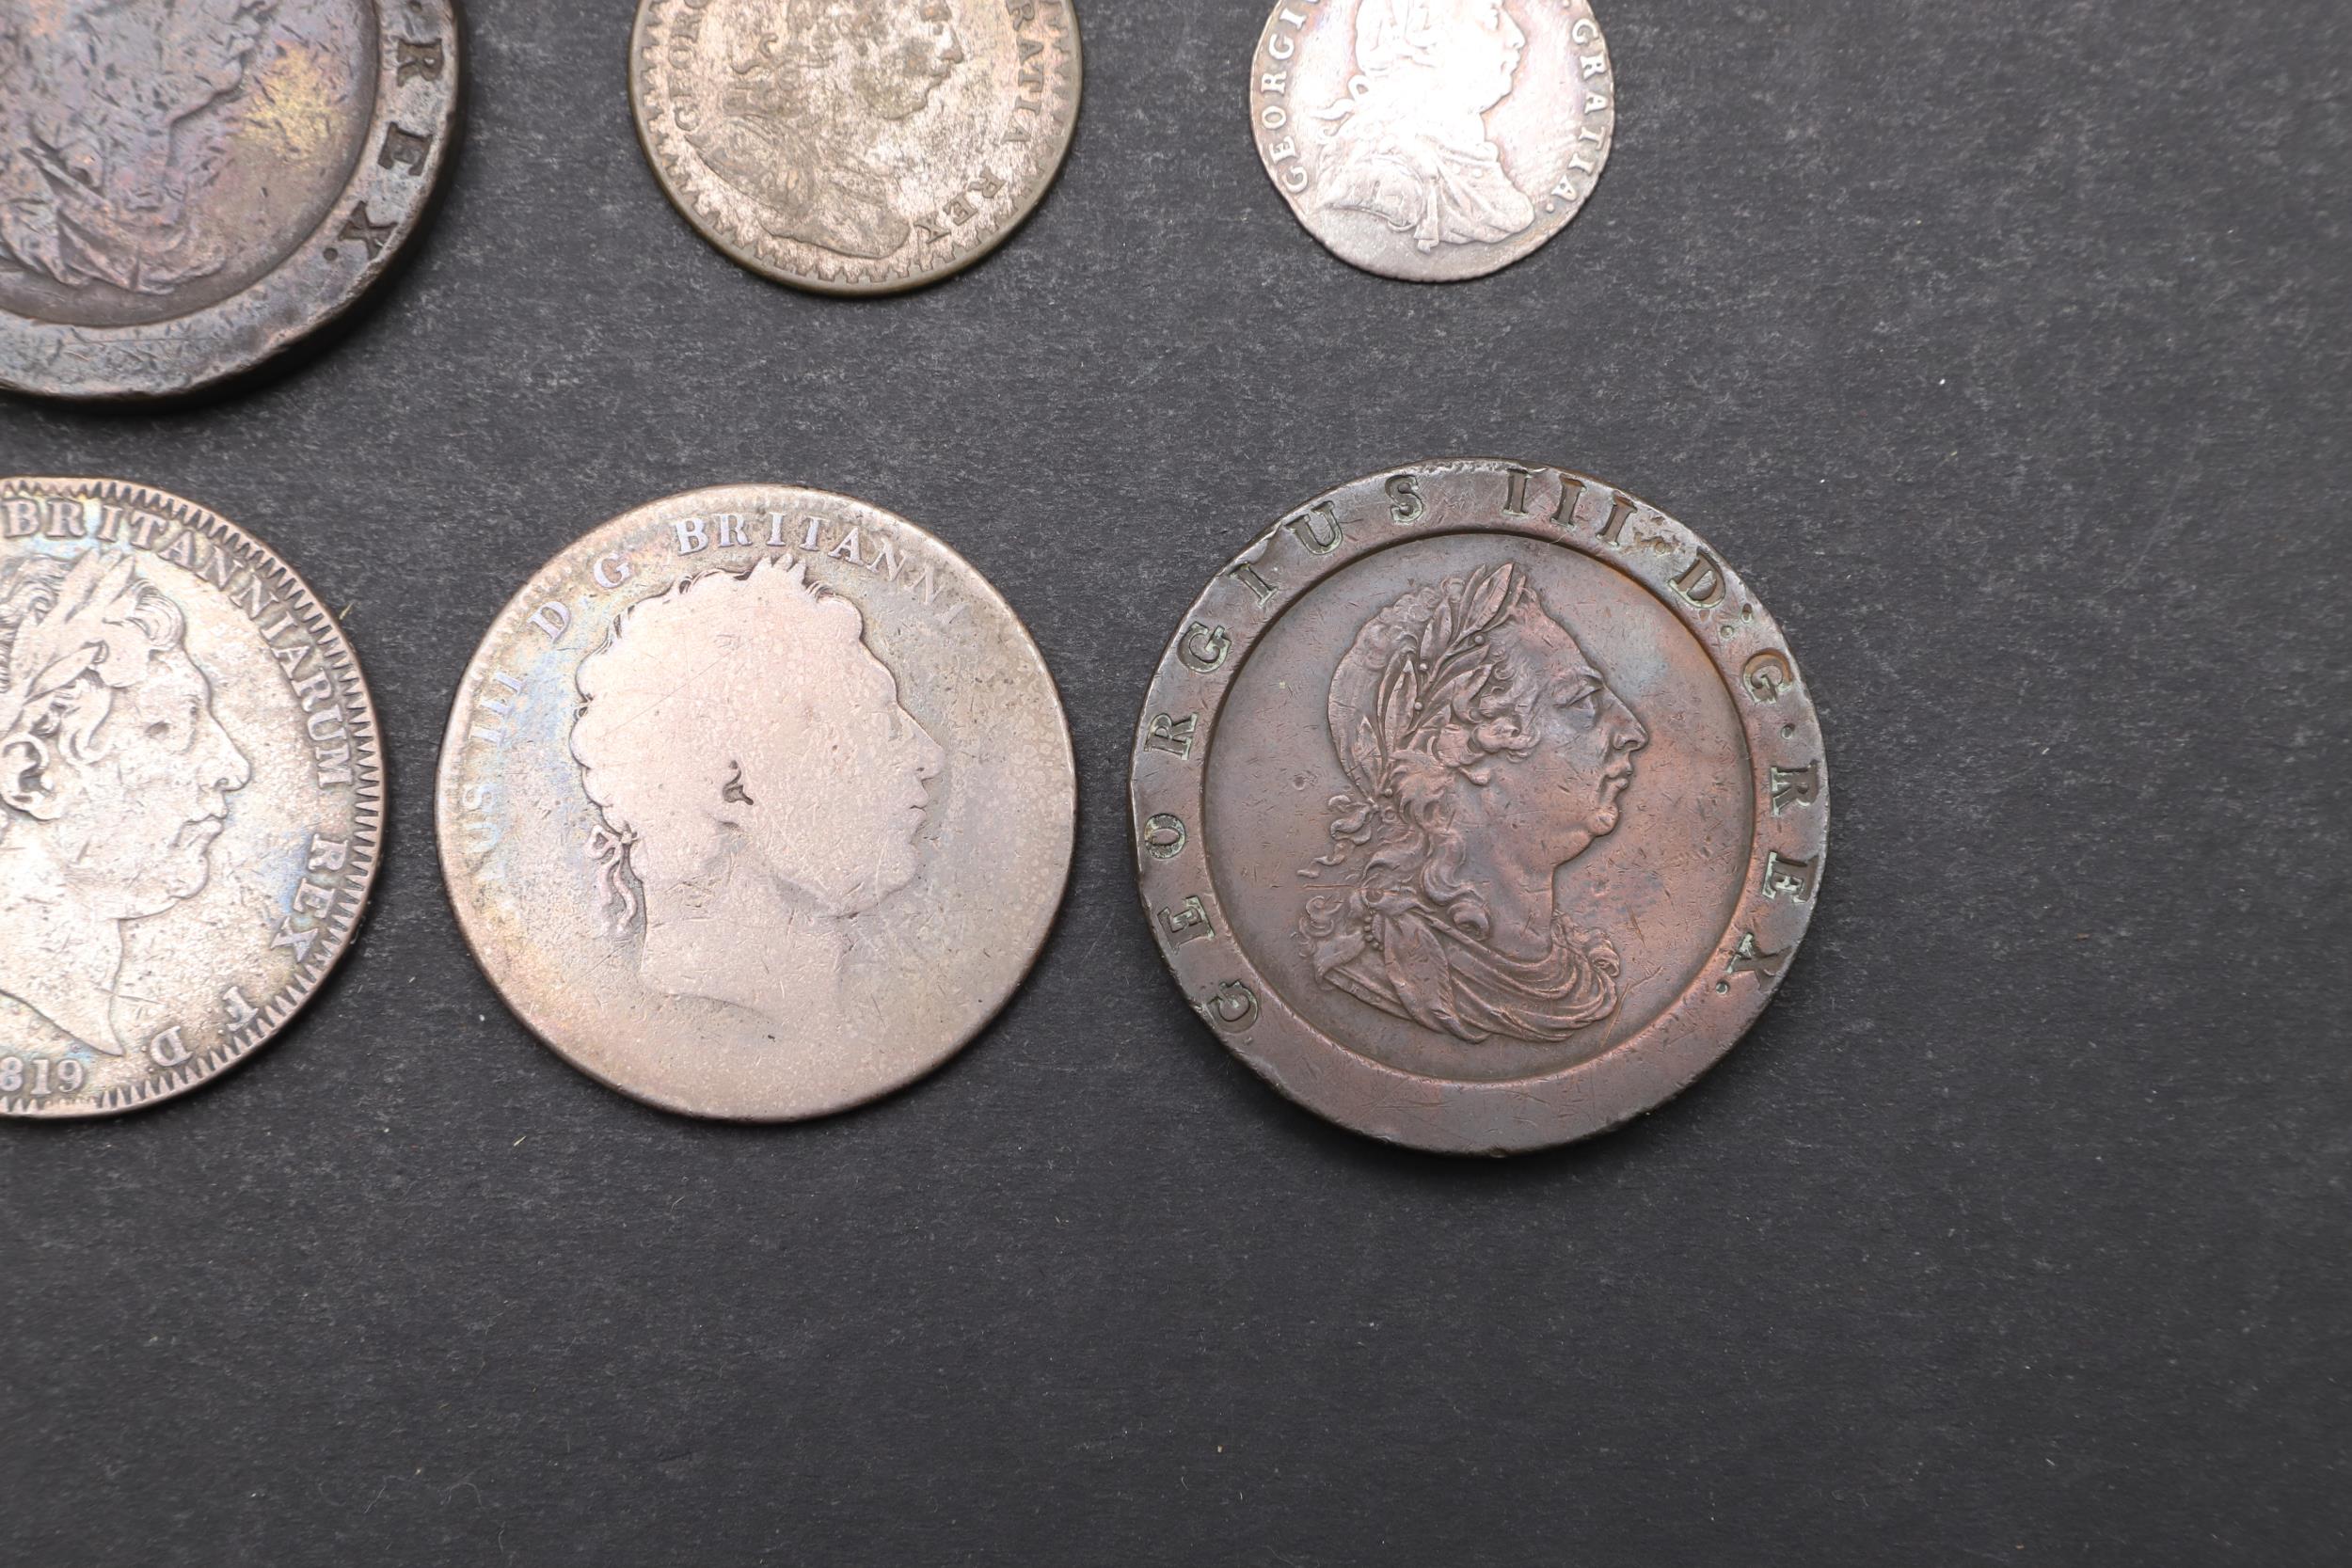 A GEORGE III CROWN AND A SMALL COLLECTION OF SIMILAR COINS. - Image 5 of 7